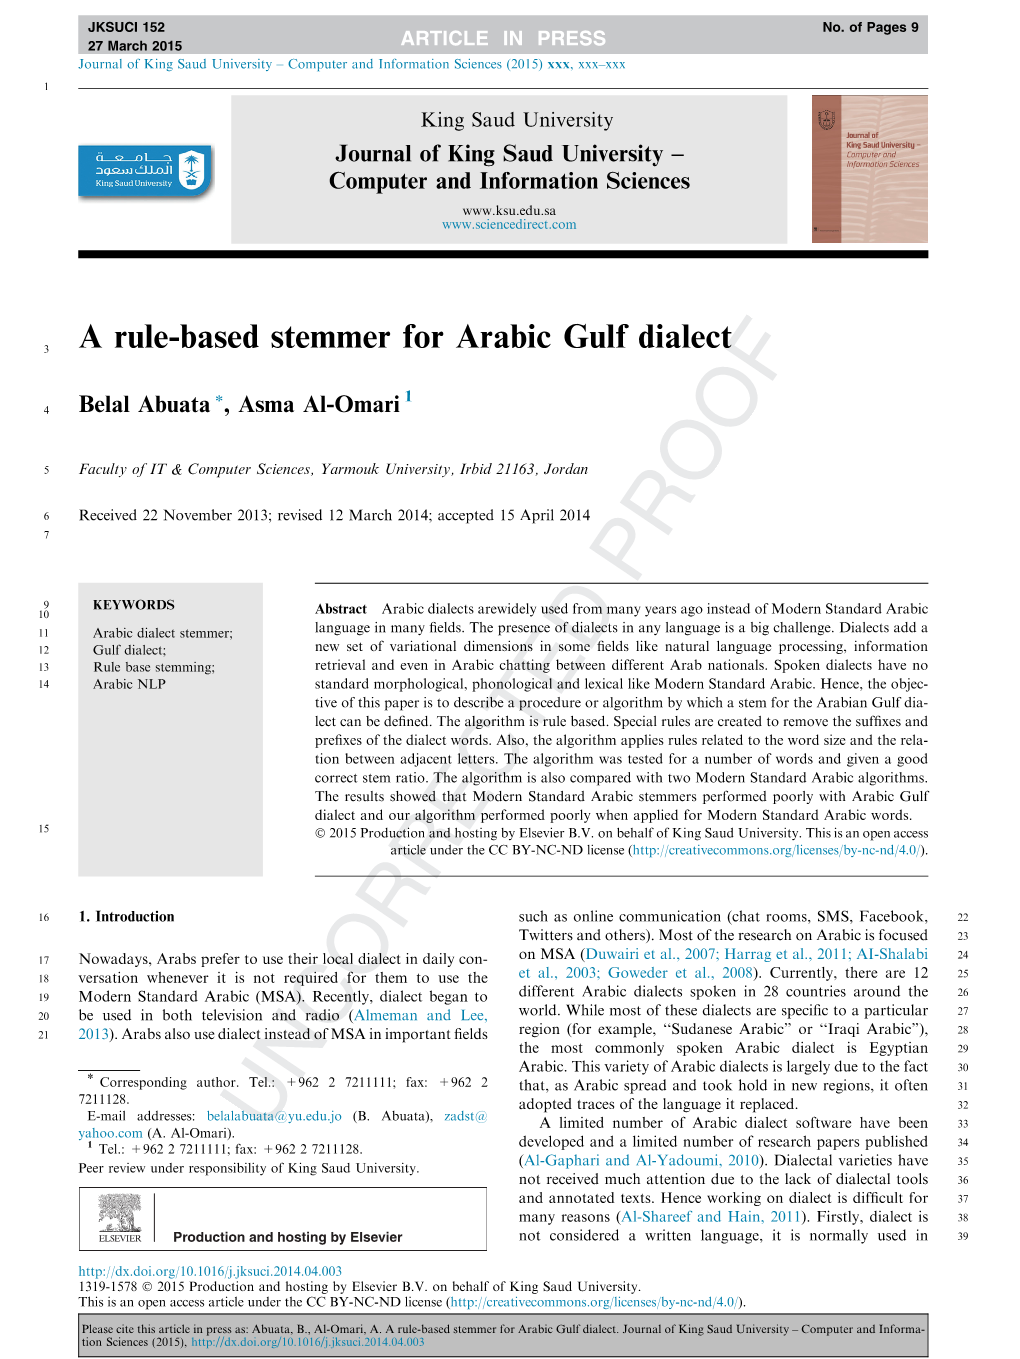 A Rule-Based Stemmer for Arabic Gulf Dialect